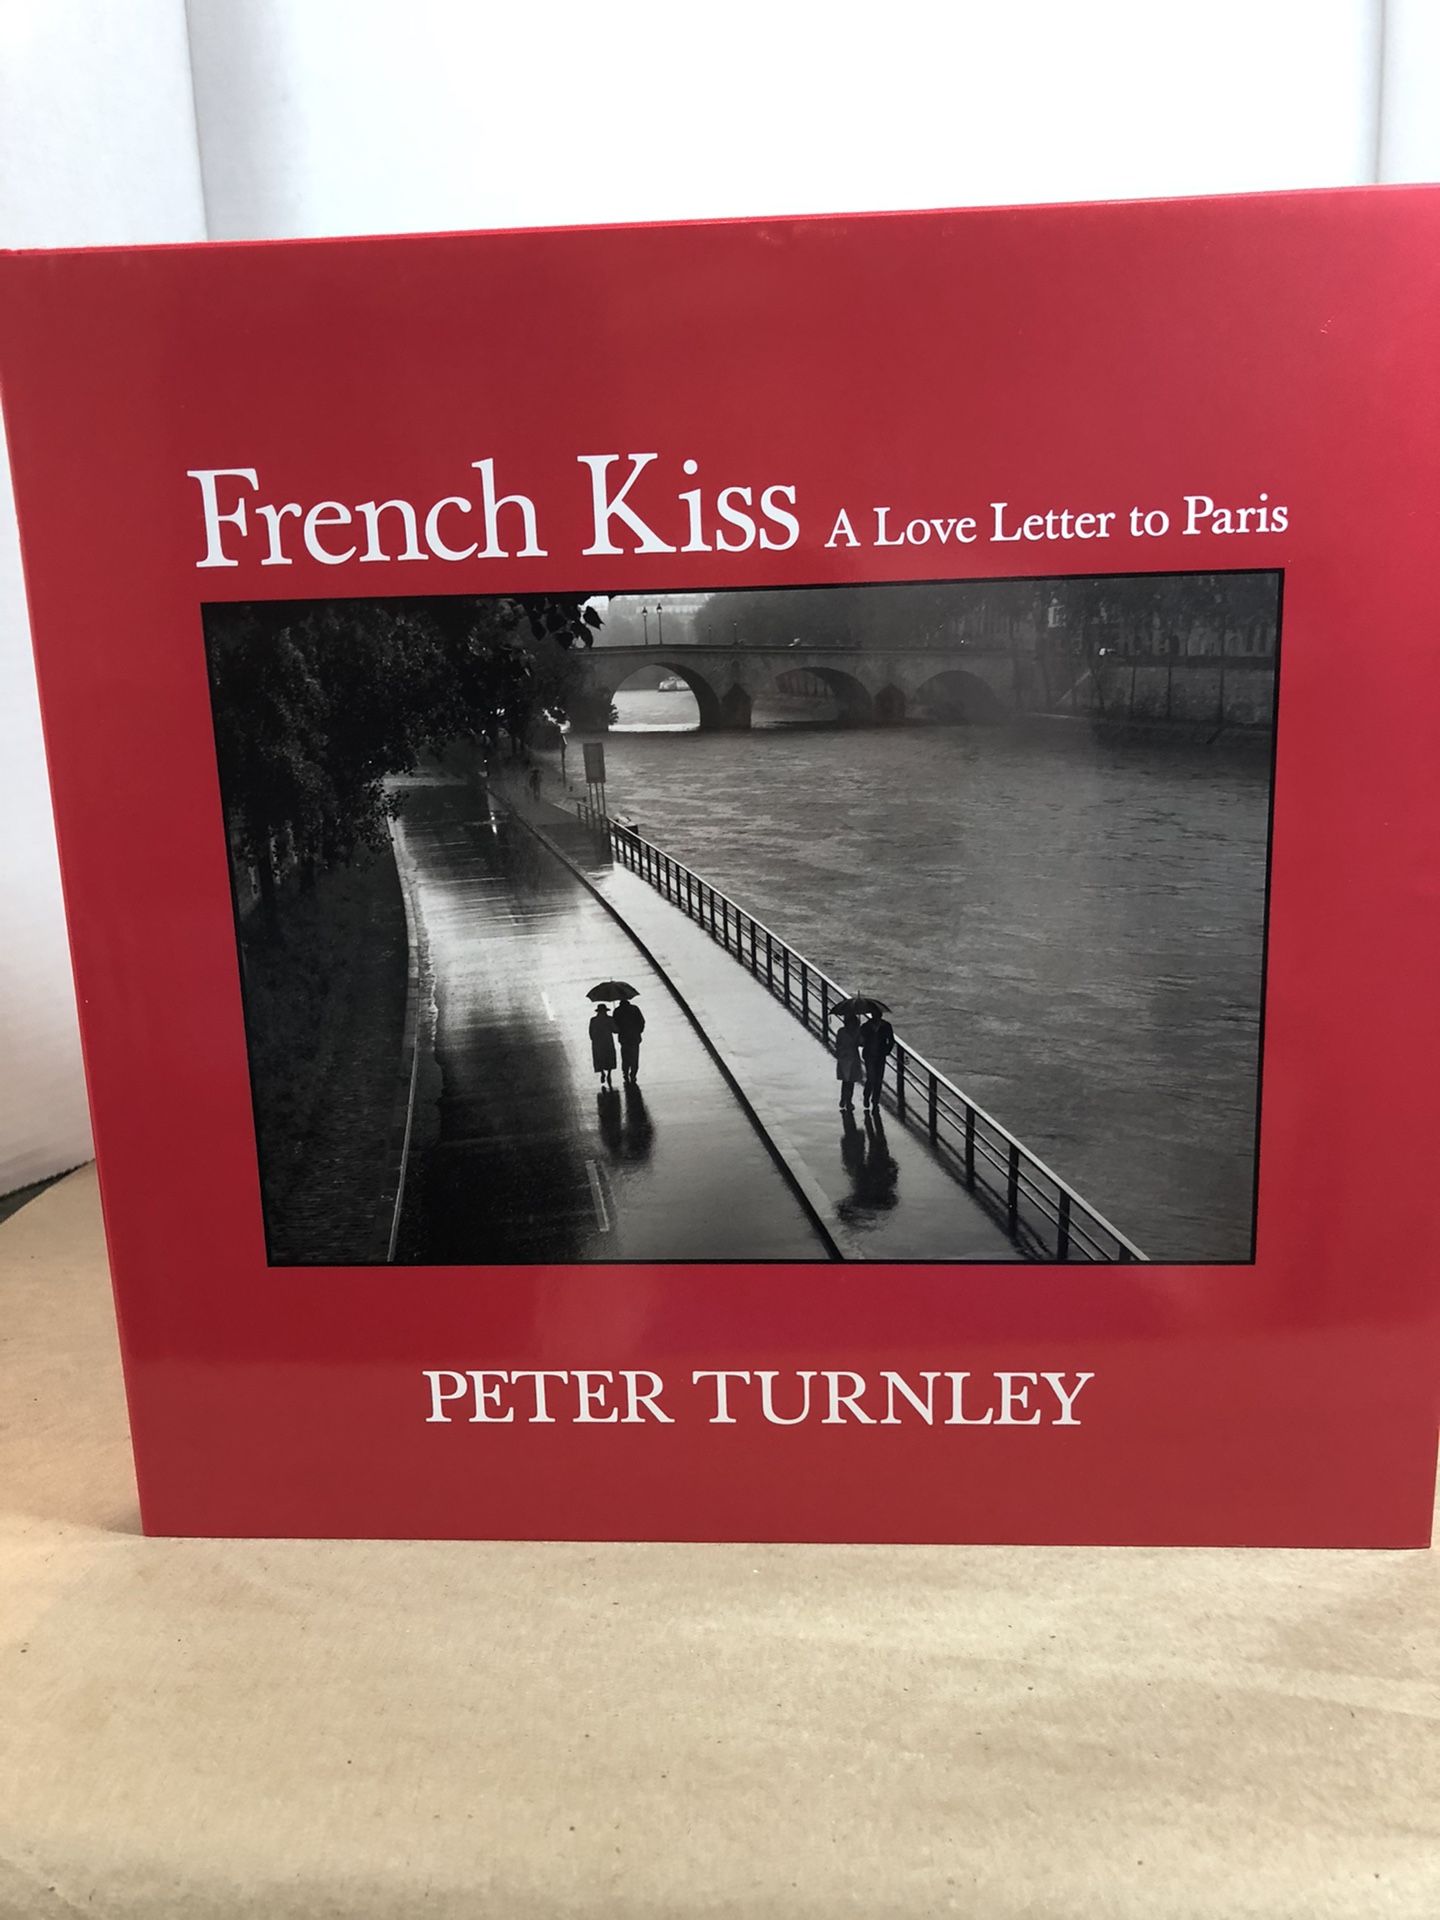 Peter turnley French kiss book signed!!!